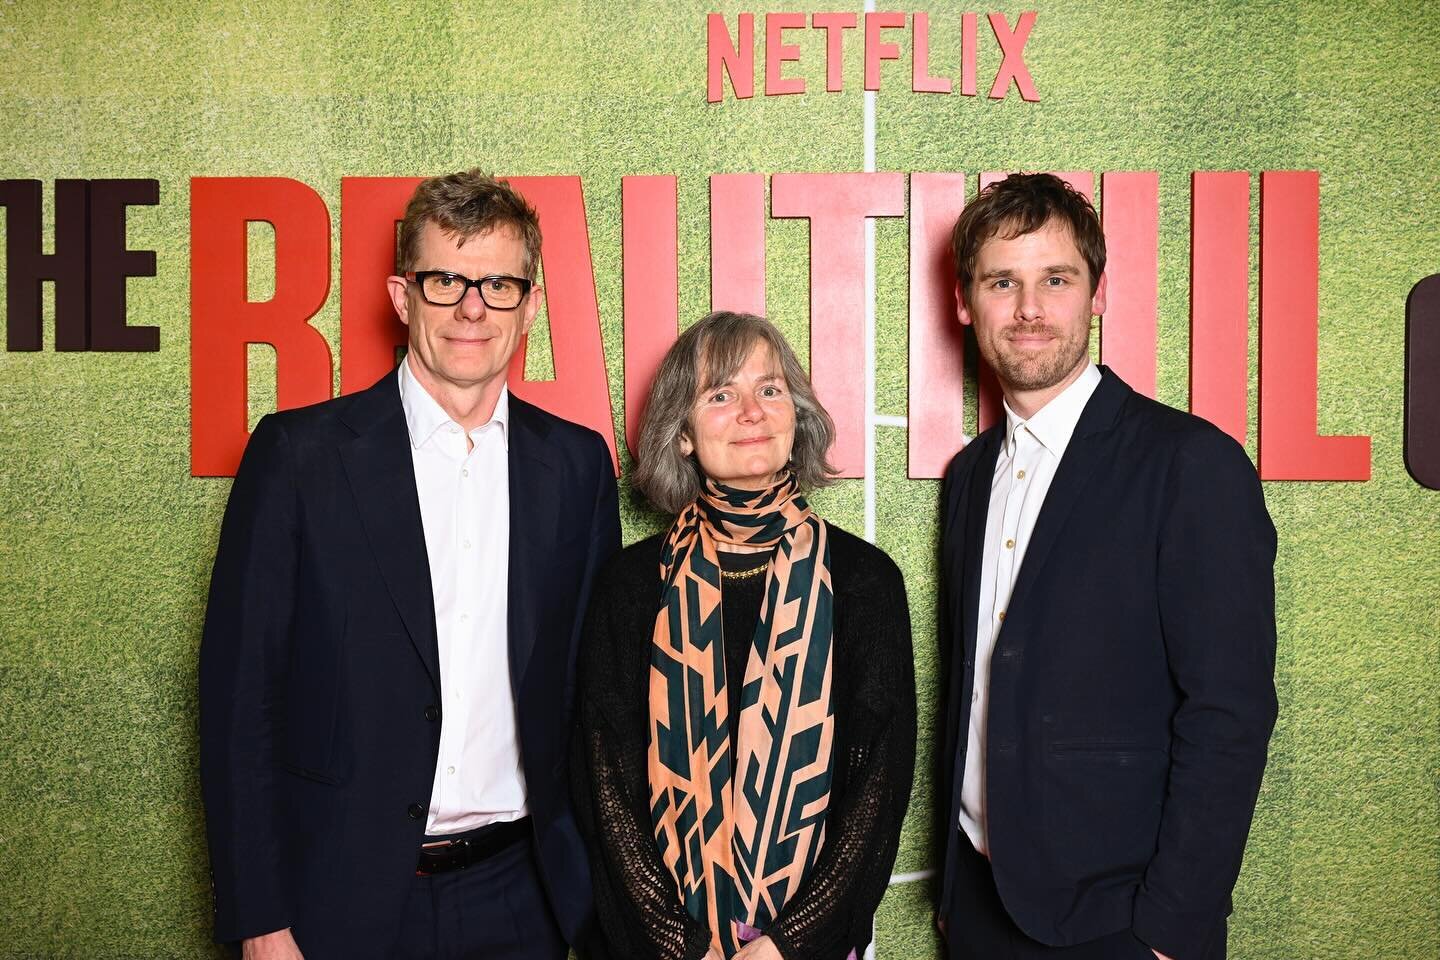 We had an absolute blast at the premiere for #thebeautifulgame last night! Producers Graham Broadbent, Anita Overland and Ben Knight were joined by director Thea Sharrock, writer Frank Cottrell Boyce, and cast members Bill Nighy, Callum Scott Howells